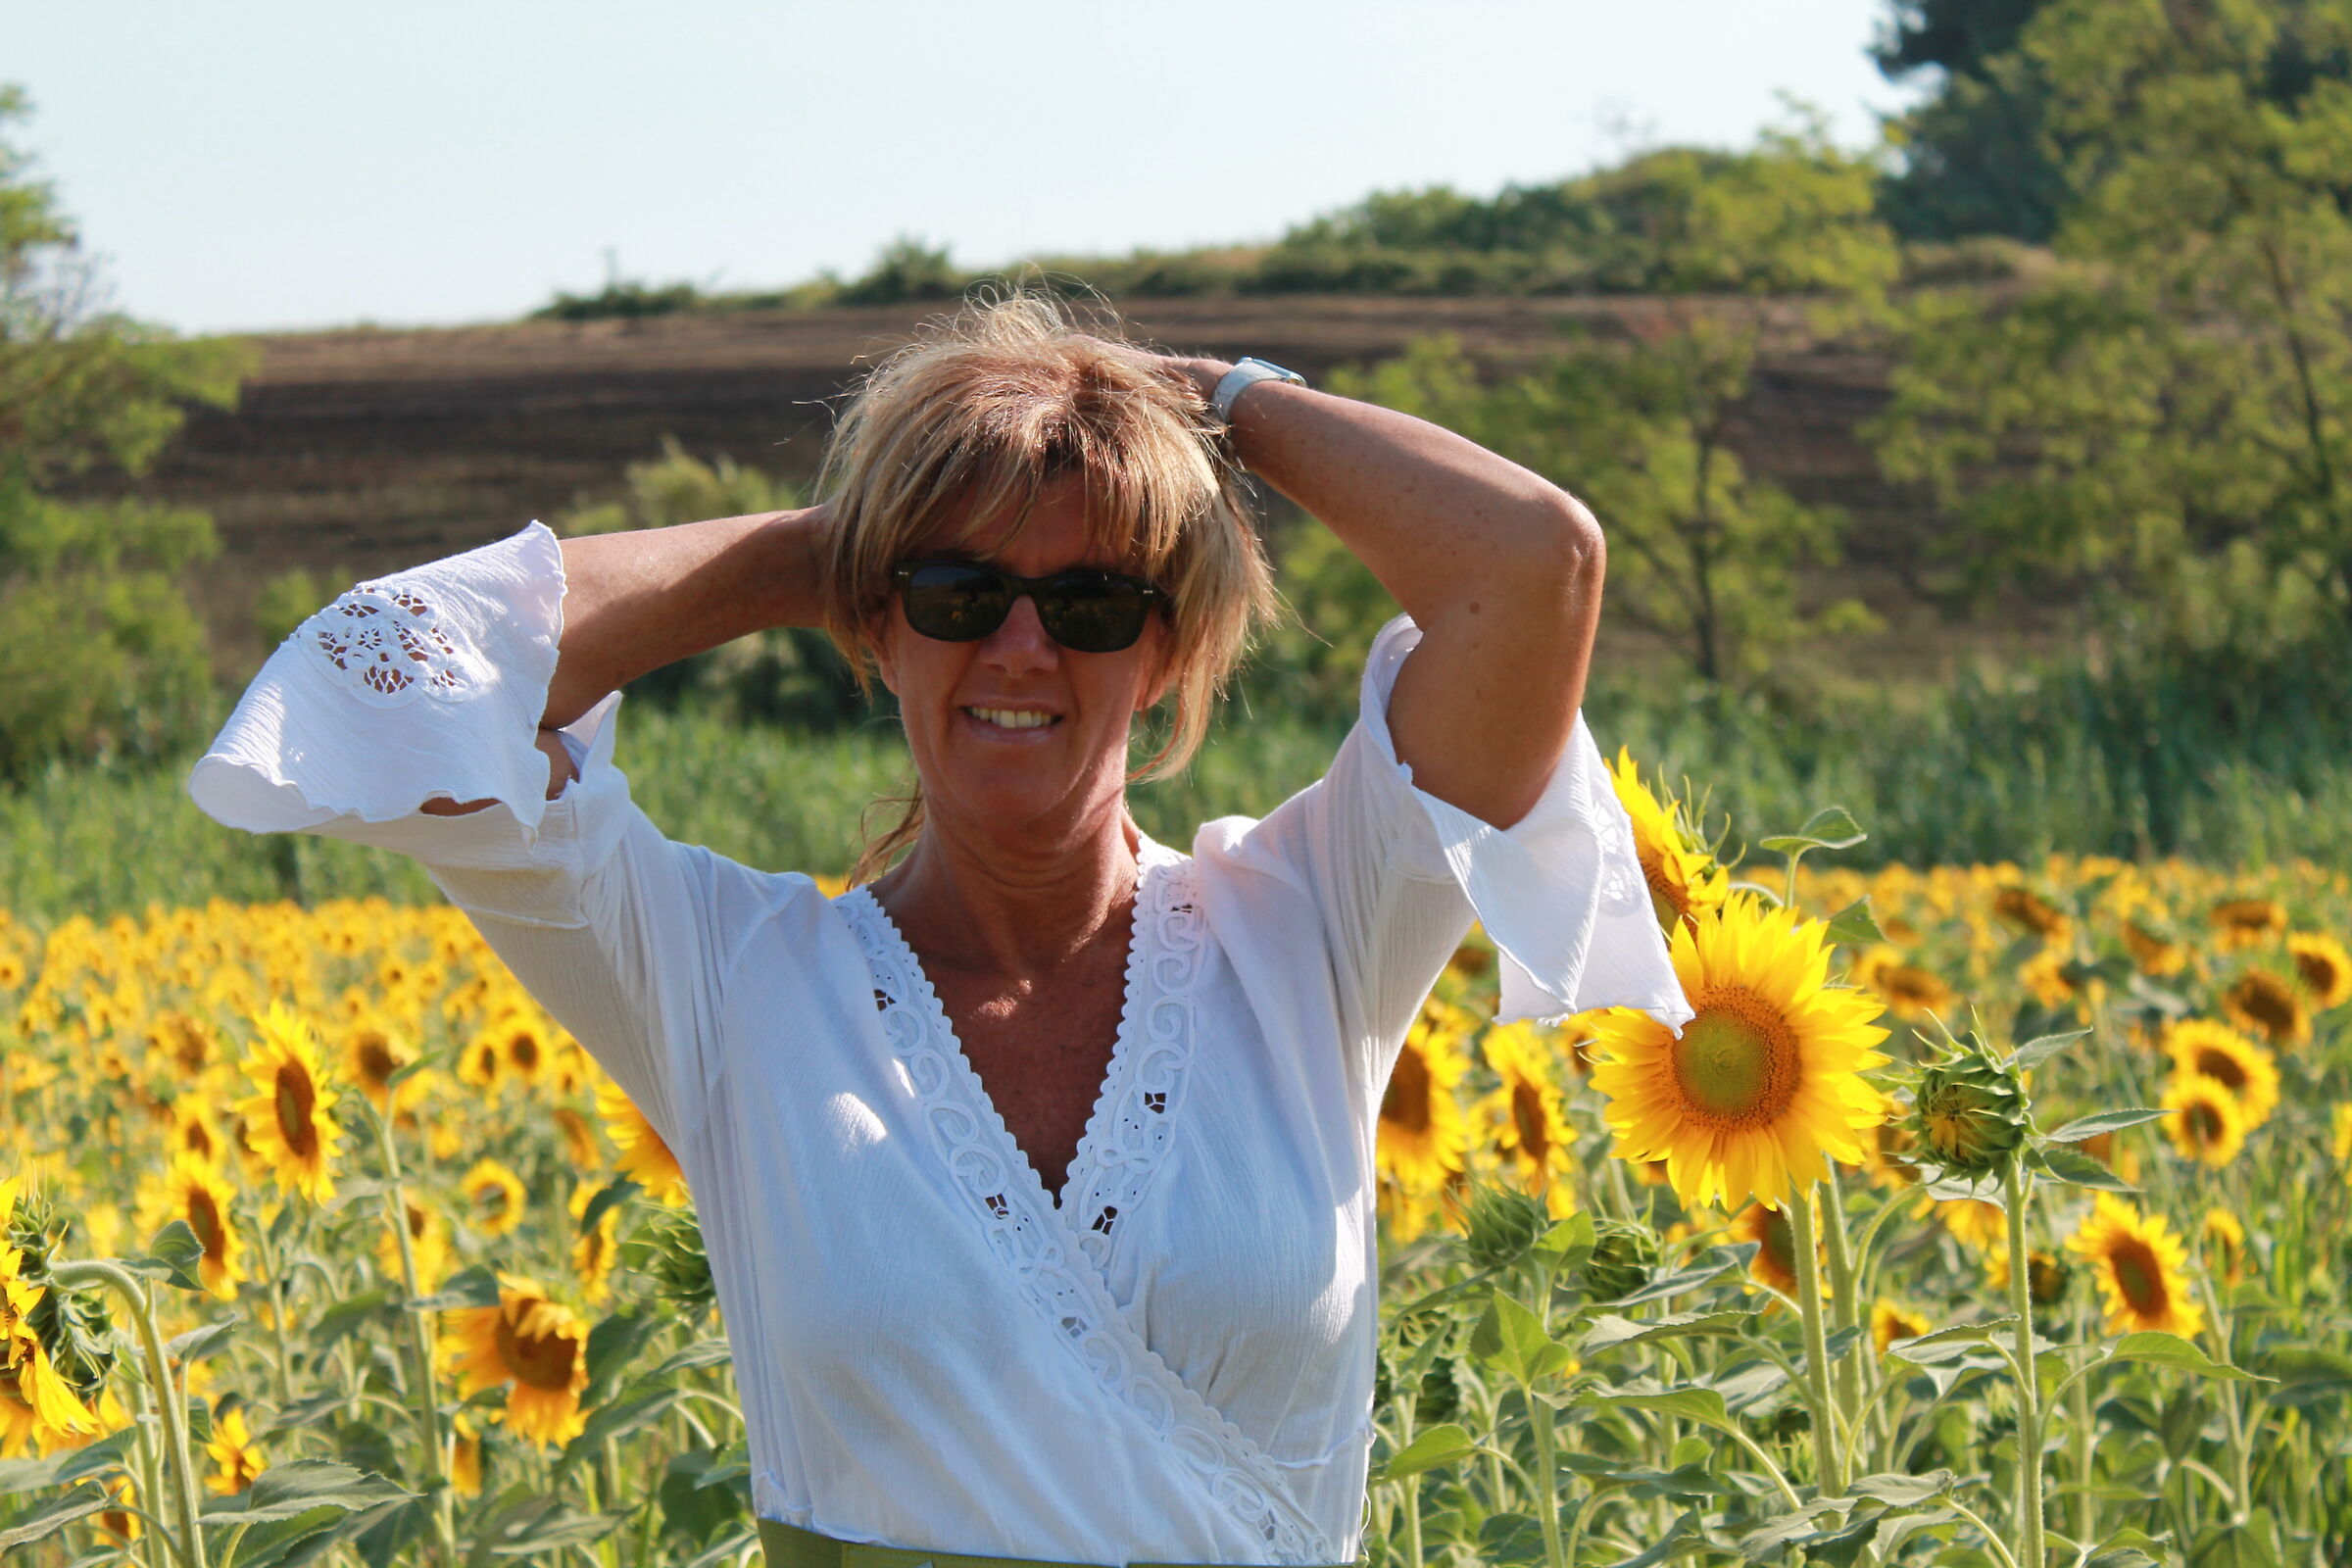 ME AND THE SUNFLOWERS...